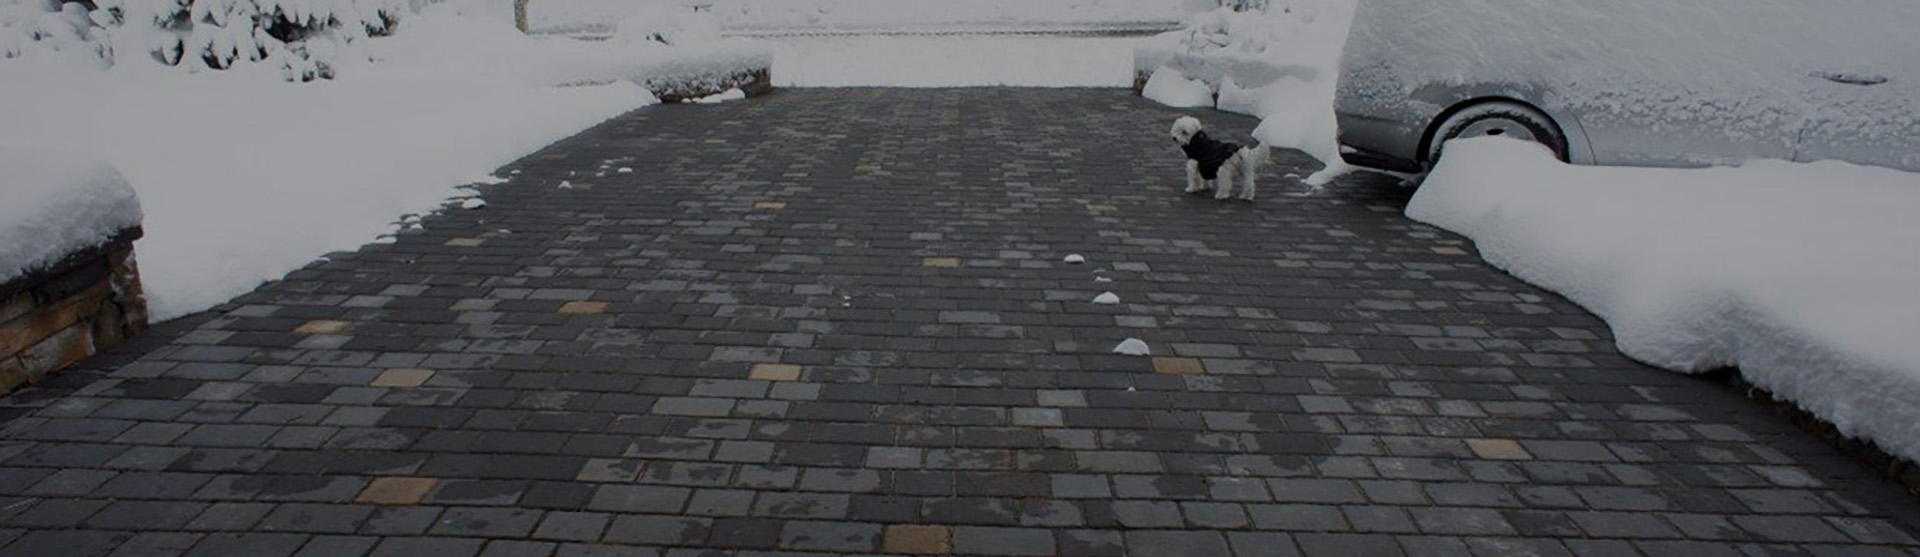 Heated paver driveway after snowstorm banner